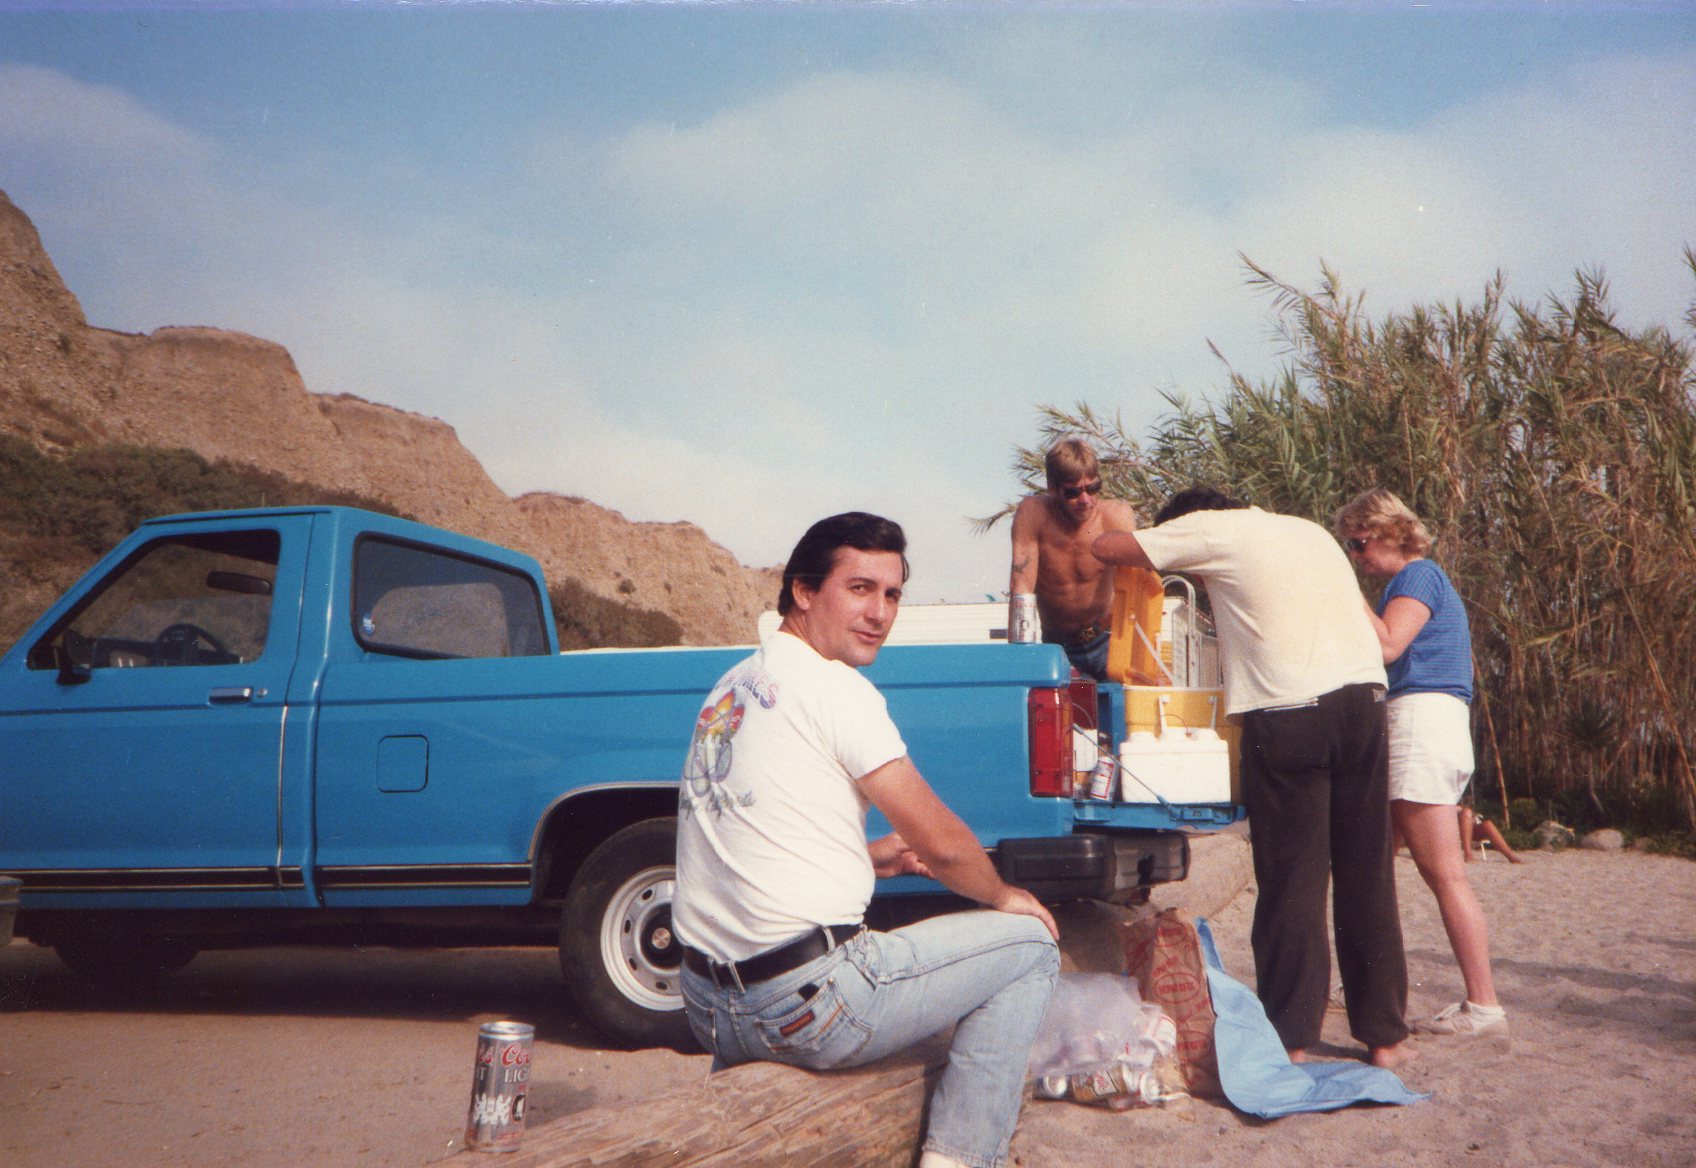 Miss you Scott
Scott Crownover at San Onofre state beach after dayshift. ~1986
